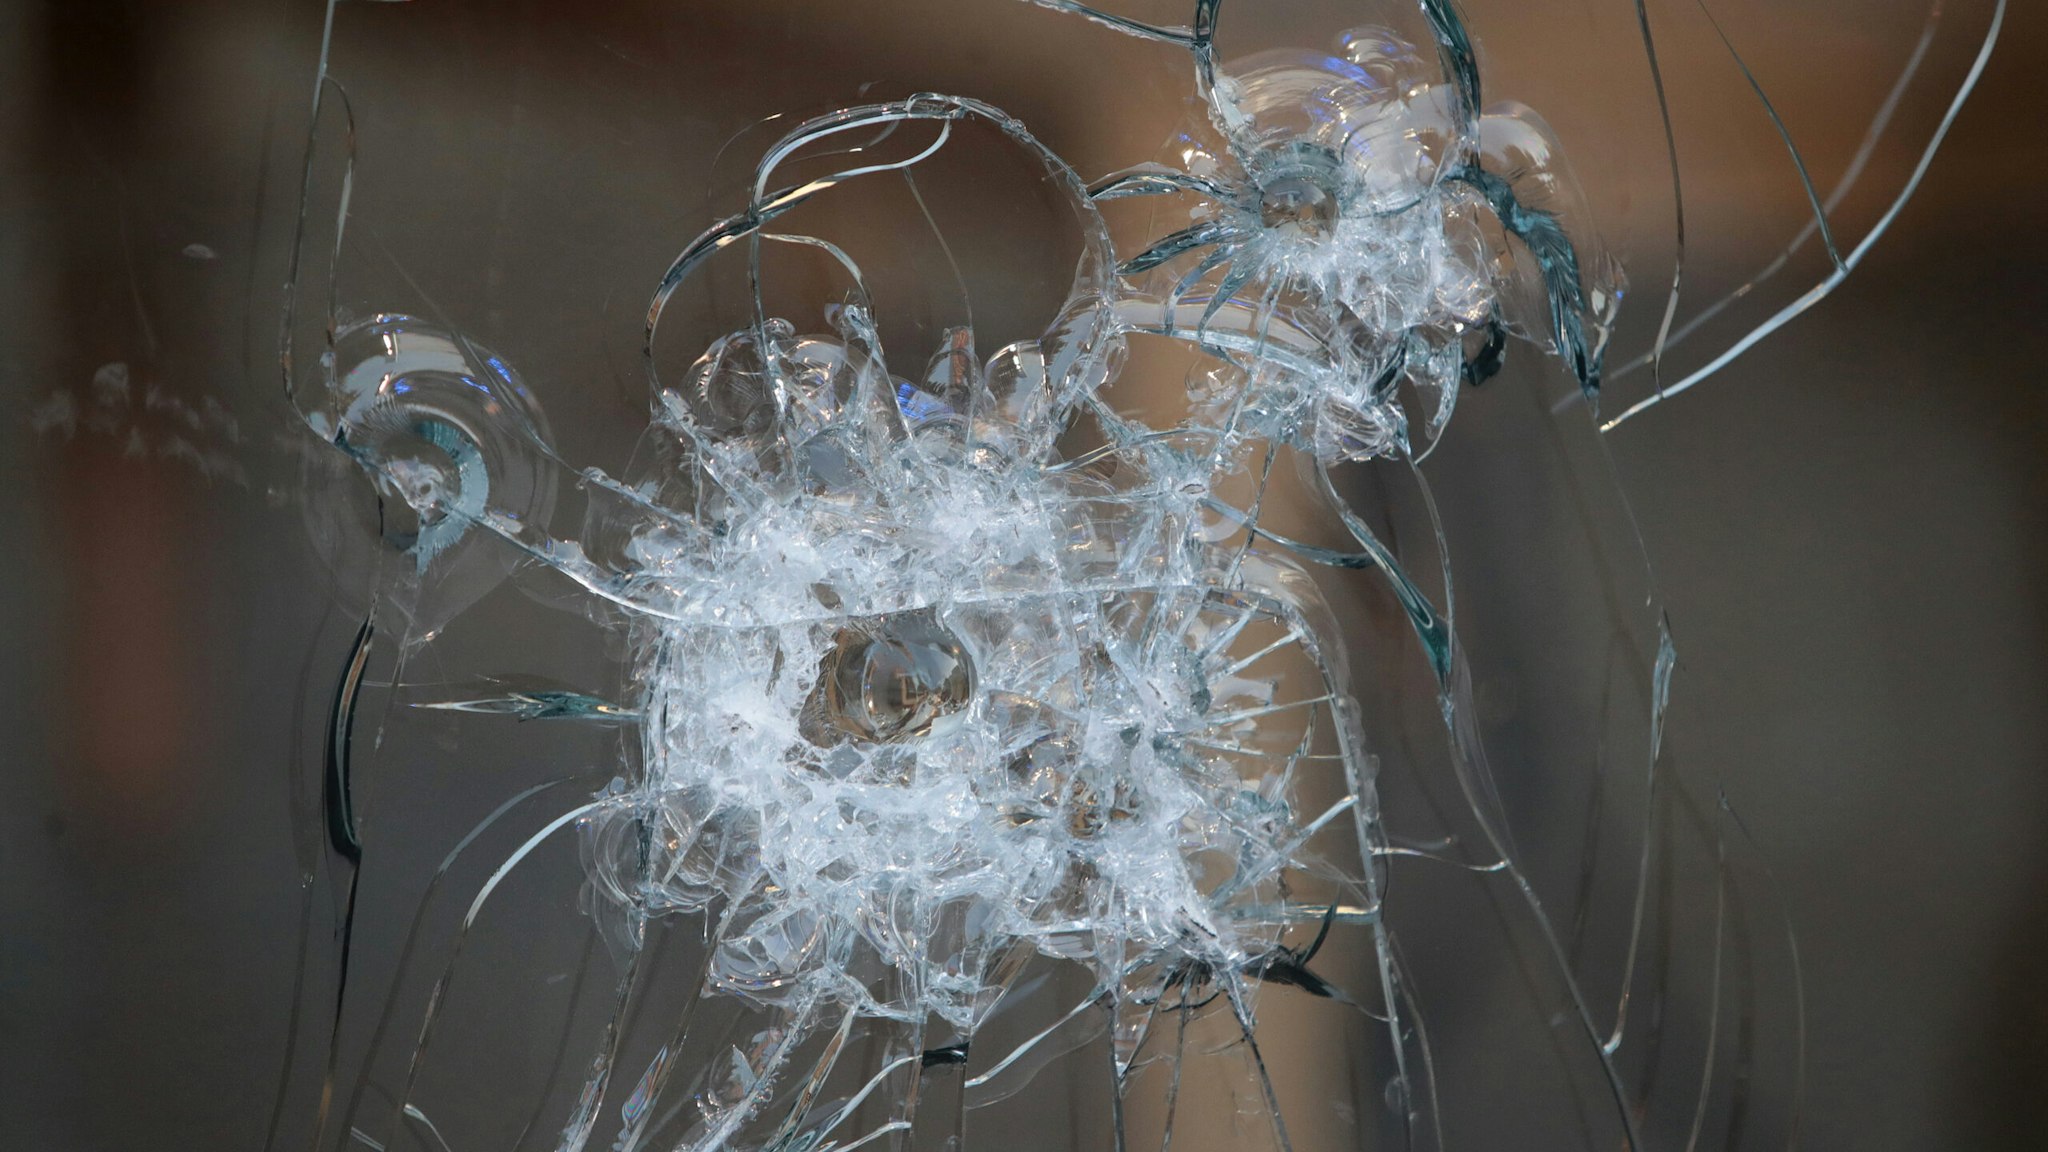 CHICAGO, ILLINOIS - AUGUST 10: A broken storefront window is seen after parts of the city had widespread looting and vandalism, on August 10, 2020 in Chicago, Illinois. Police made several arrests during the night of unrest and recovered at least one firearm. (Photo by Scott Olson/Getty Images)